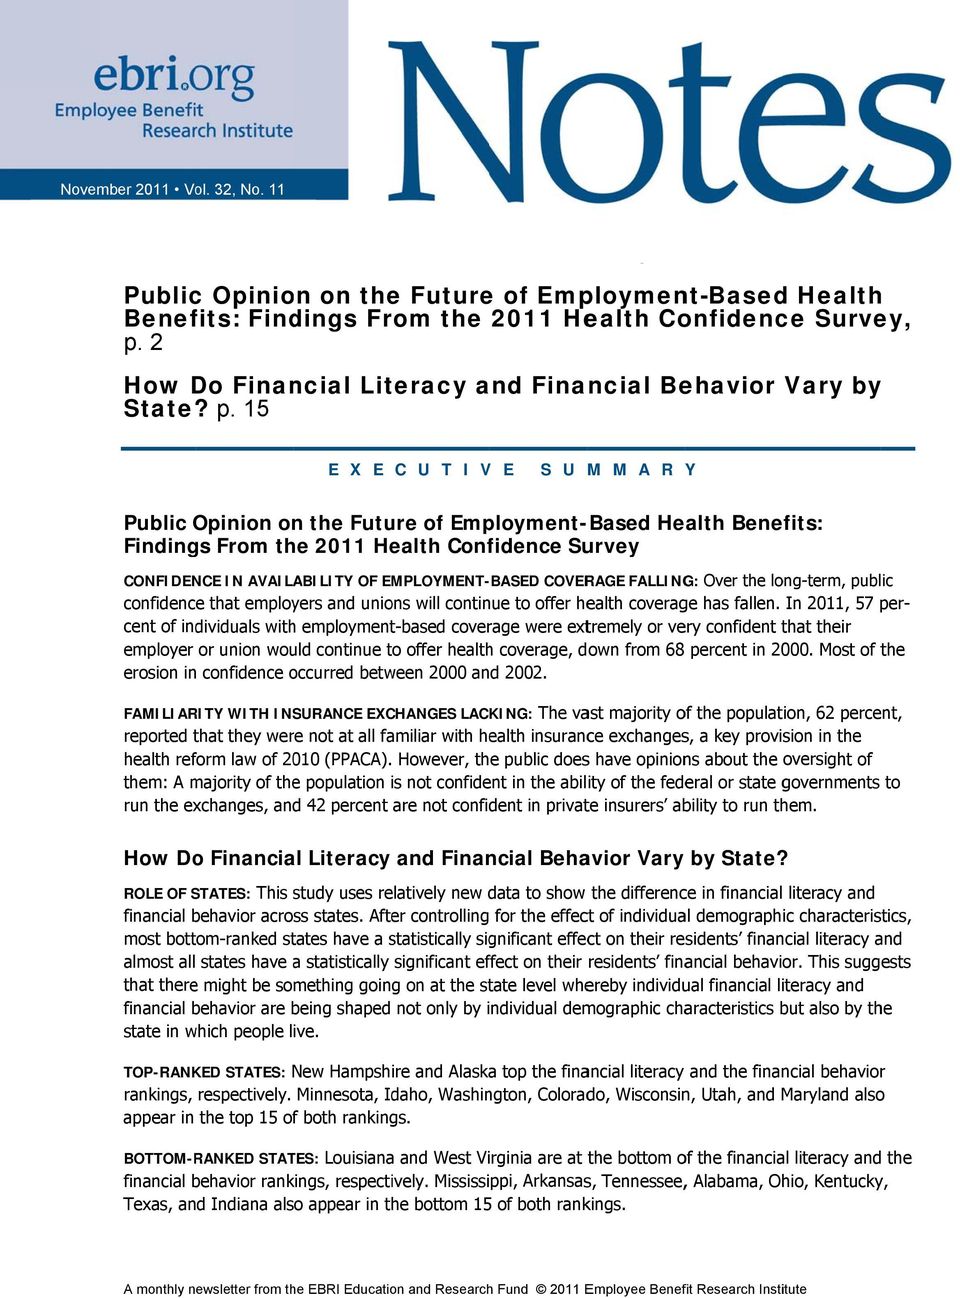 15 E X E C U T I V E S U M M A R Y Public Opinion on the Future of Employment-Based Survey Health Benefits: Findings From the 2011 Health Confidence CONFIDENCE IN AVAILABILITY OF EMPLOYMENT-BASED